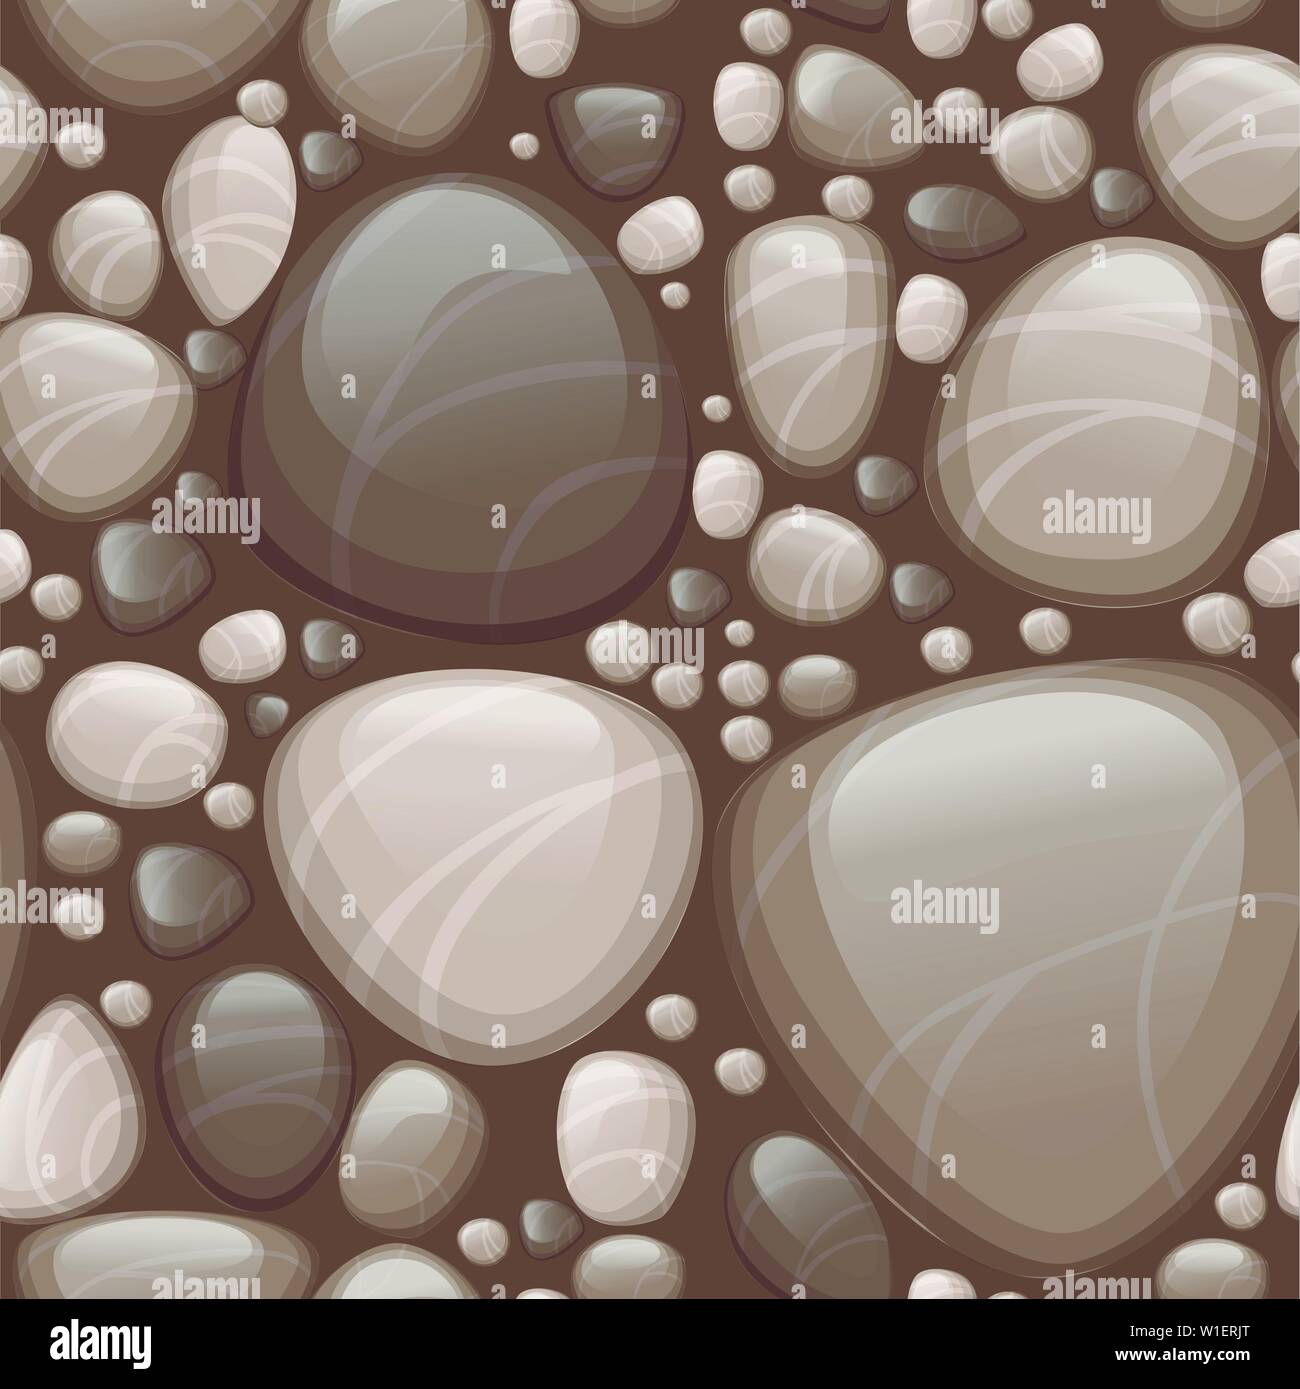 Seamless pattern of smooth stones or pebbles flat vector illustration on brown background. Stock Vector